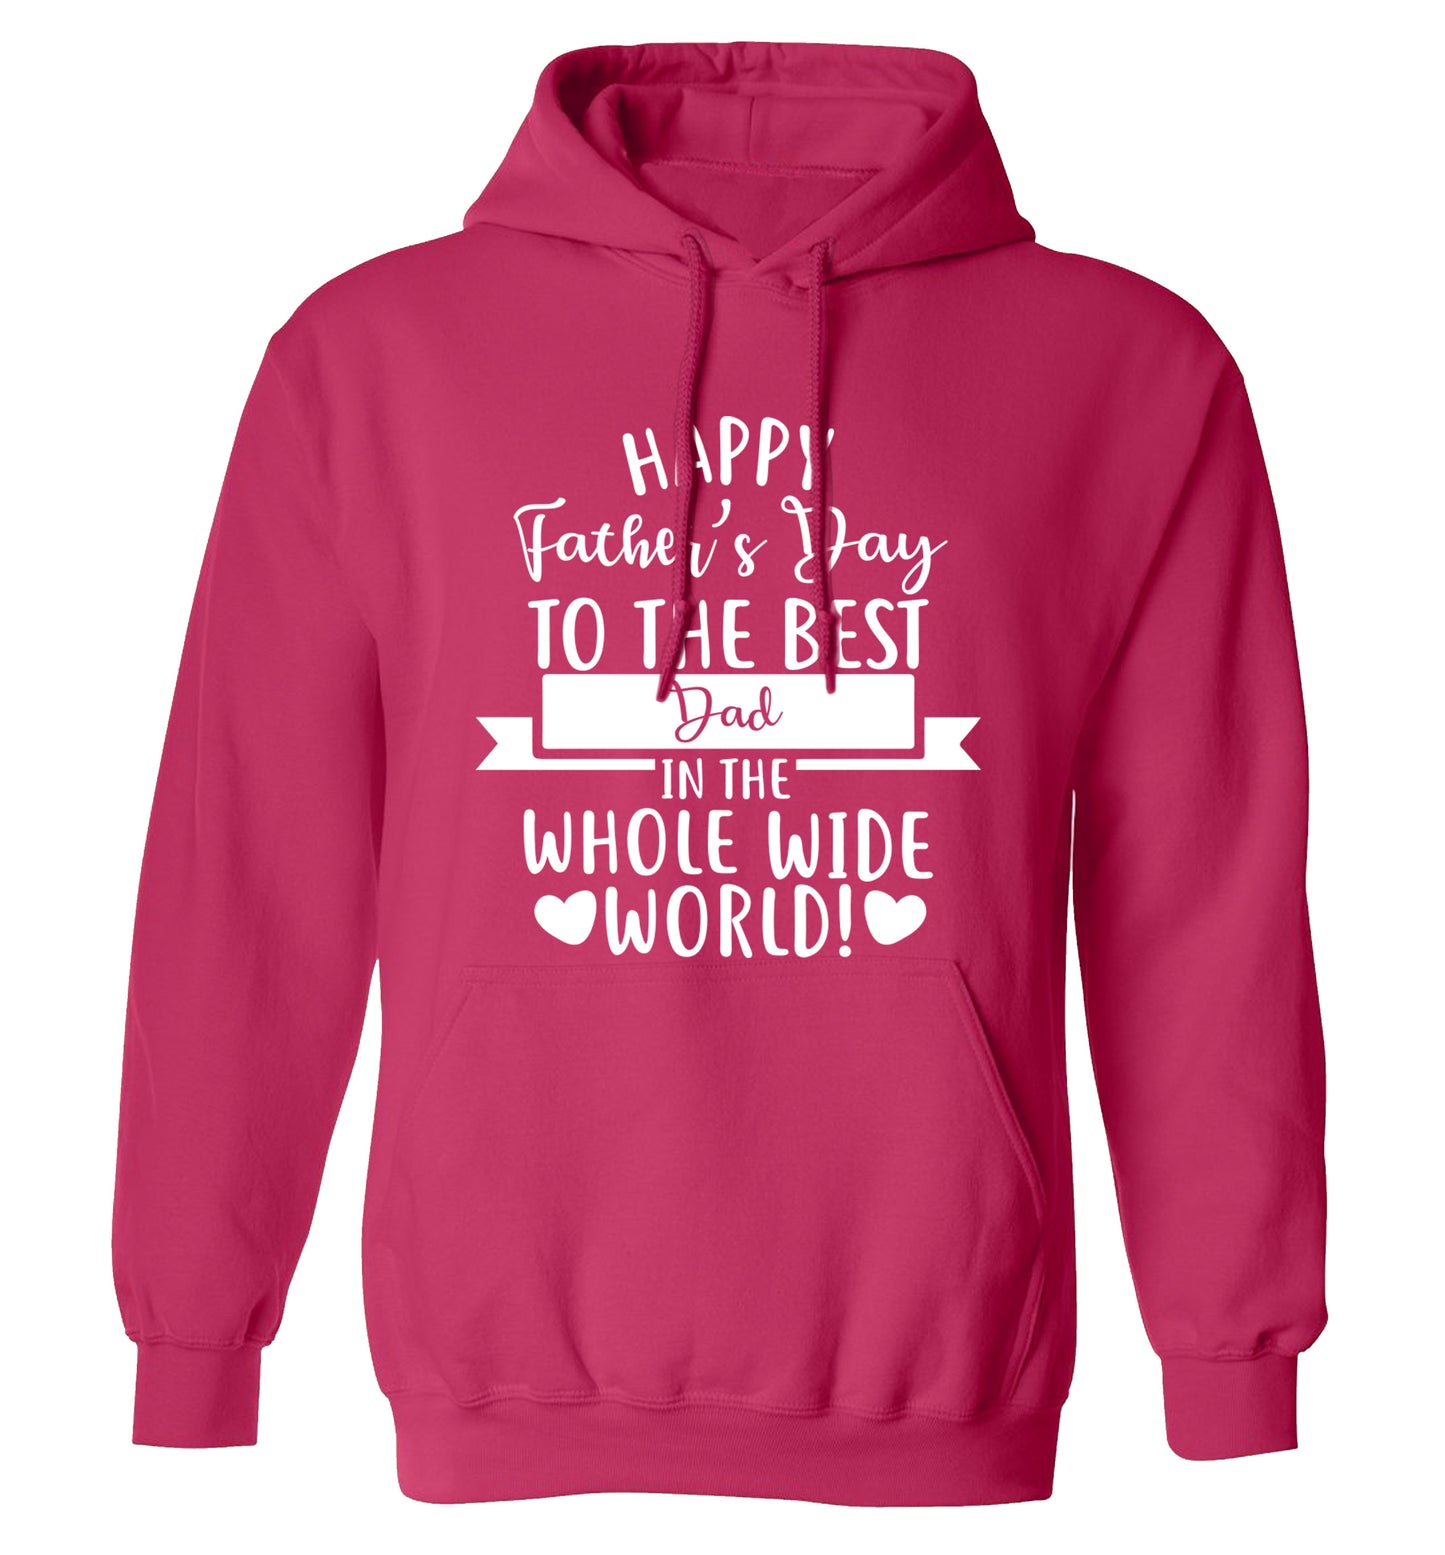 Happy Father's Day to the best father in the world! adults unisex pink hoodie 2XL